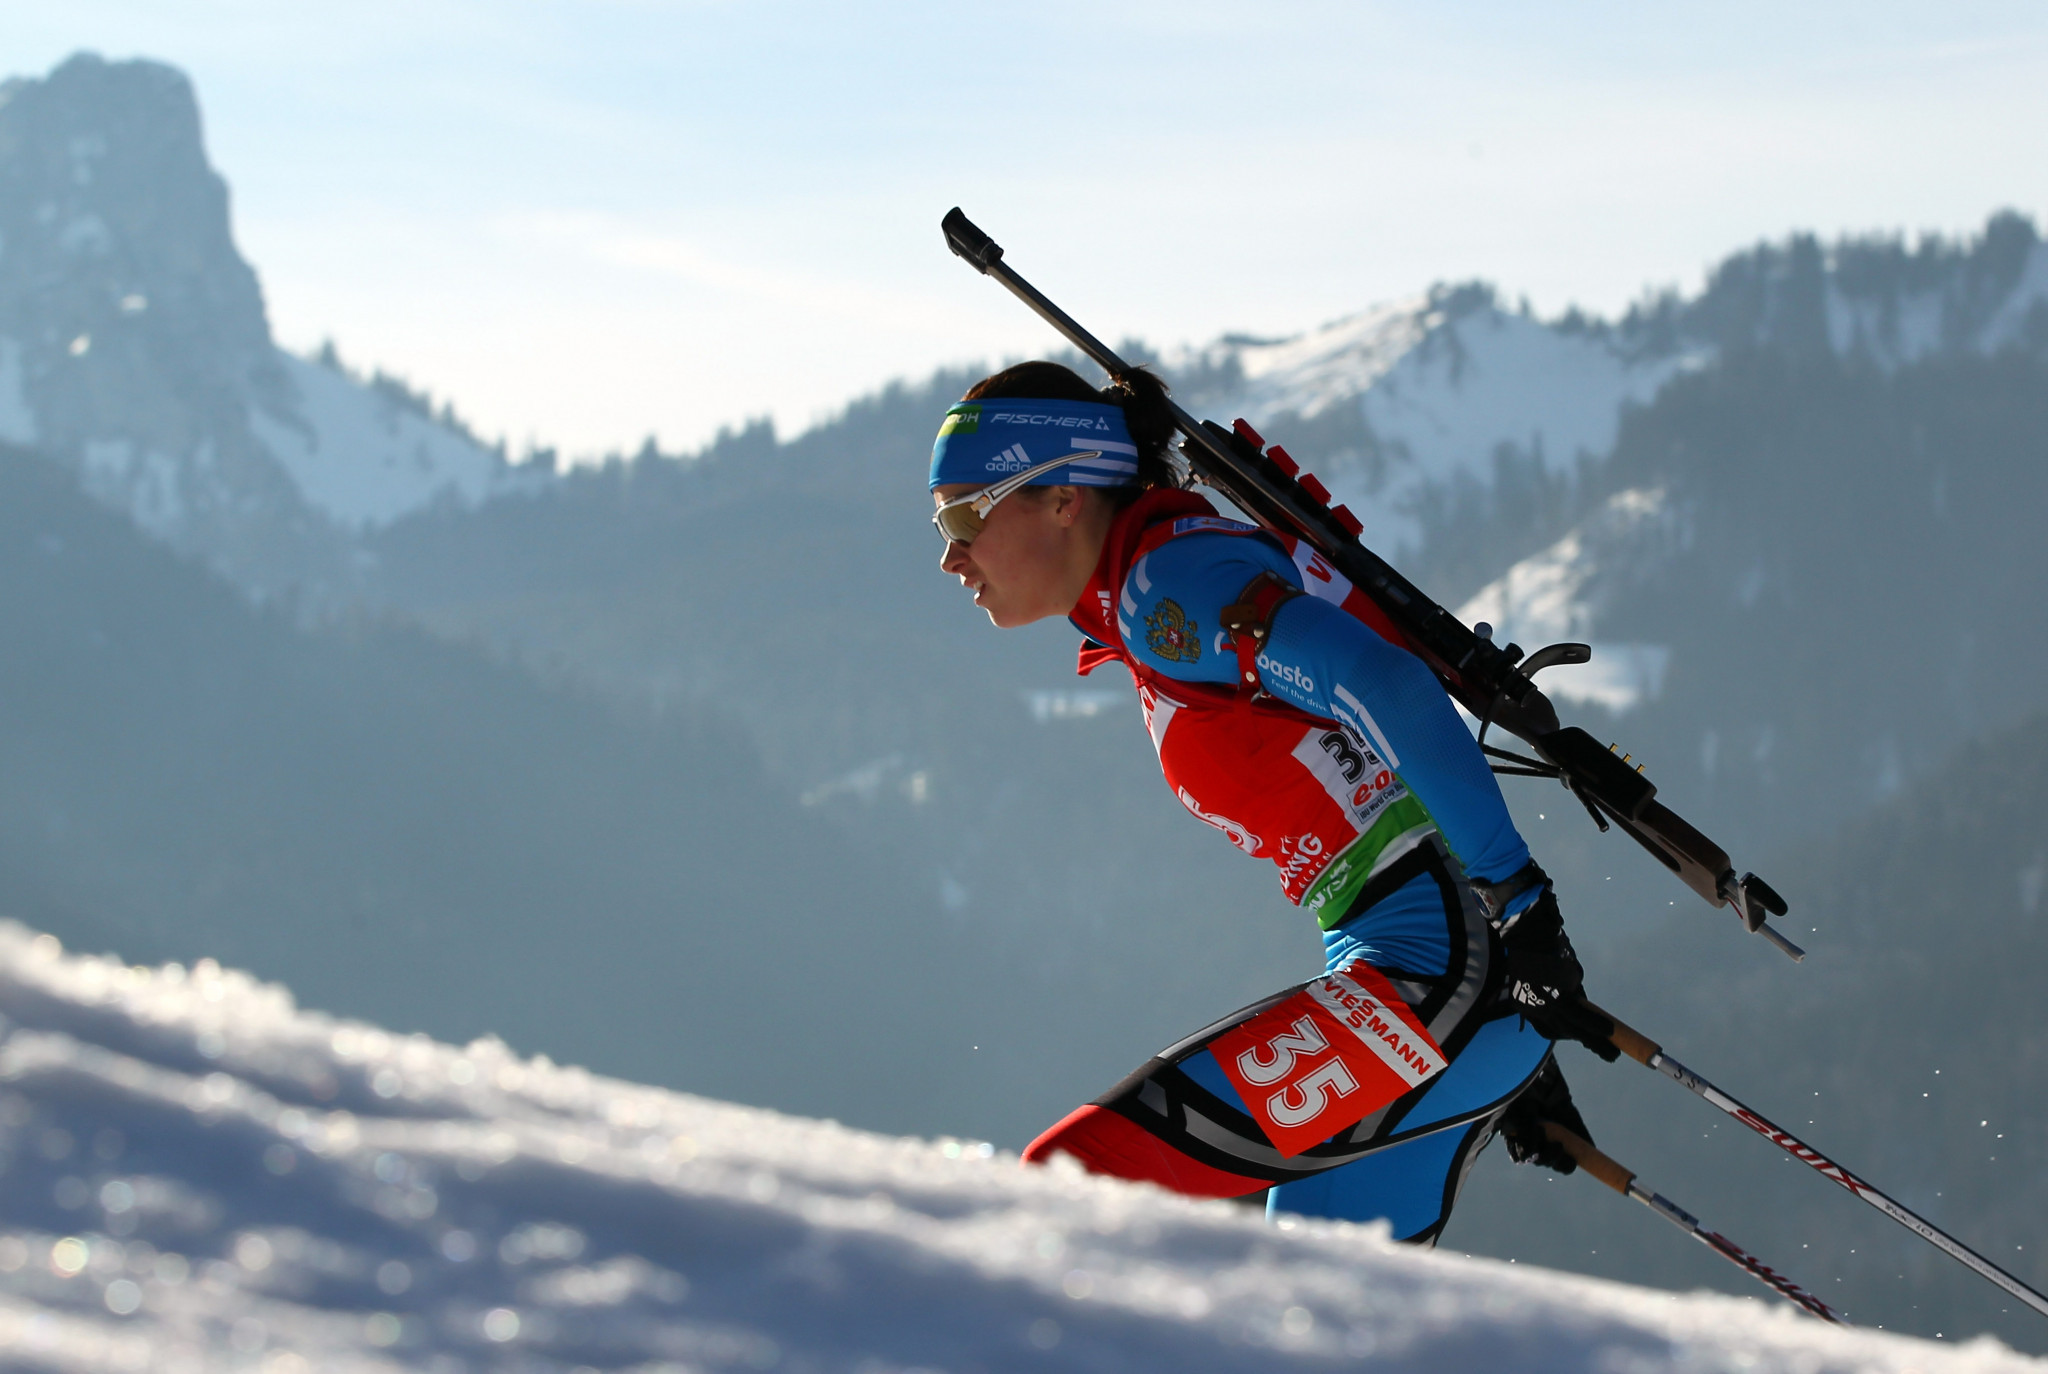 Russian biathlon has been hugely impacted by the country's doping crisis ©Getty Images